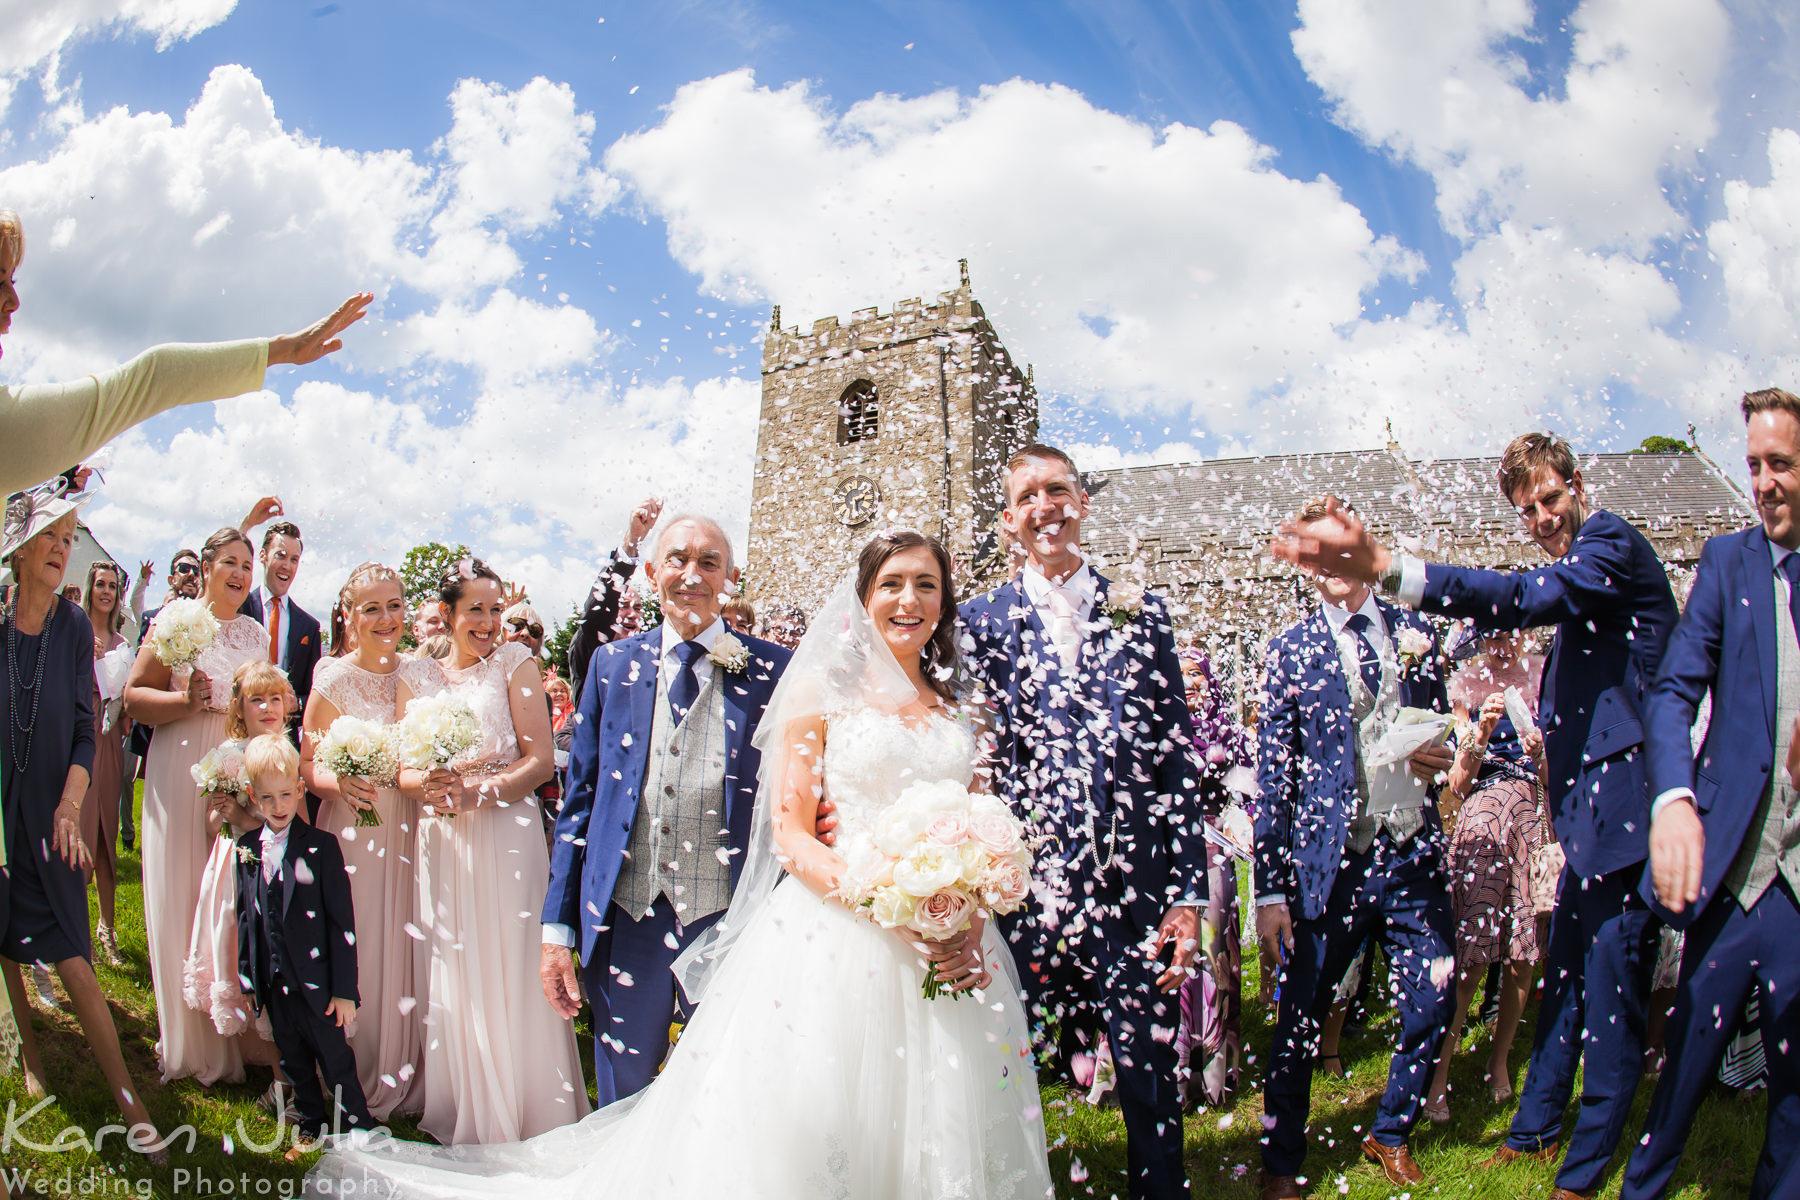 guests throw confetti and bride and groom outside the church